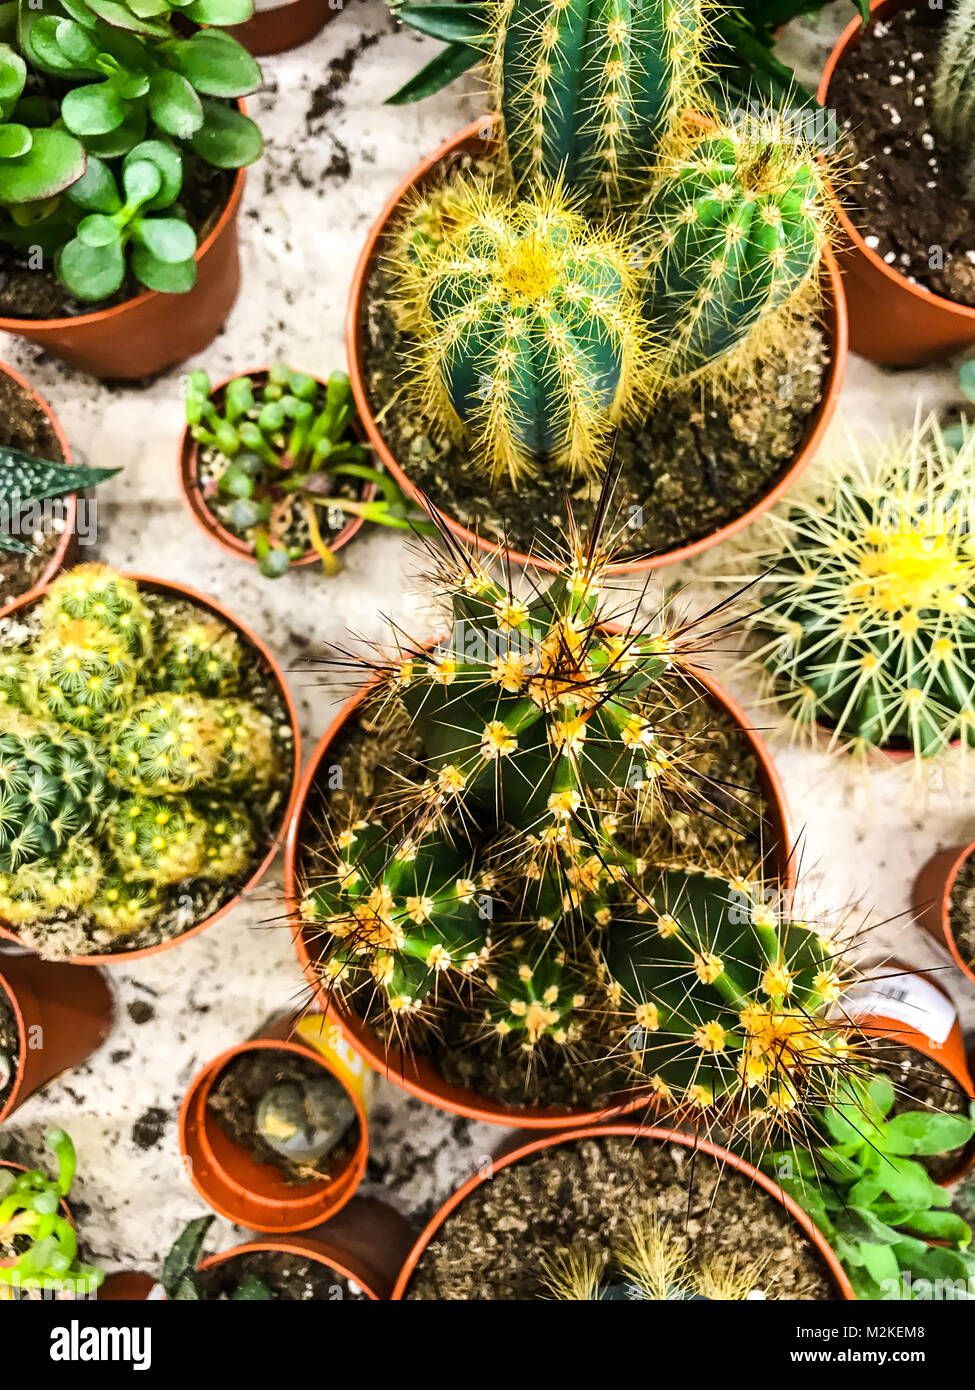 Cacti and succulents in pots on the table Stock Photo